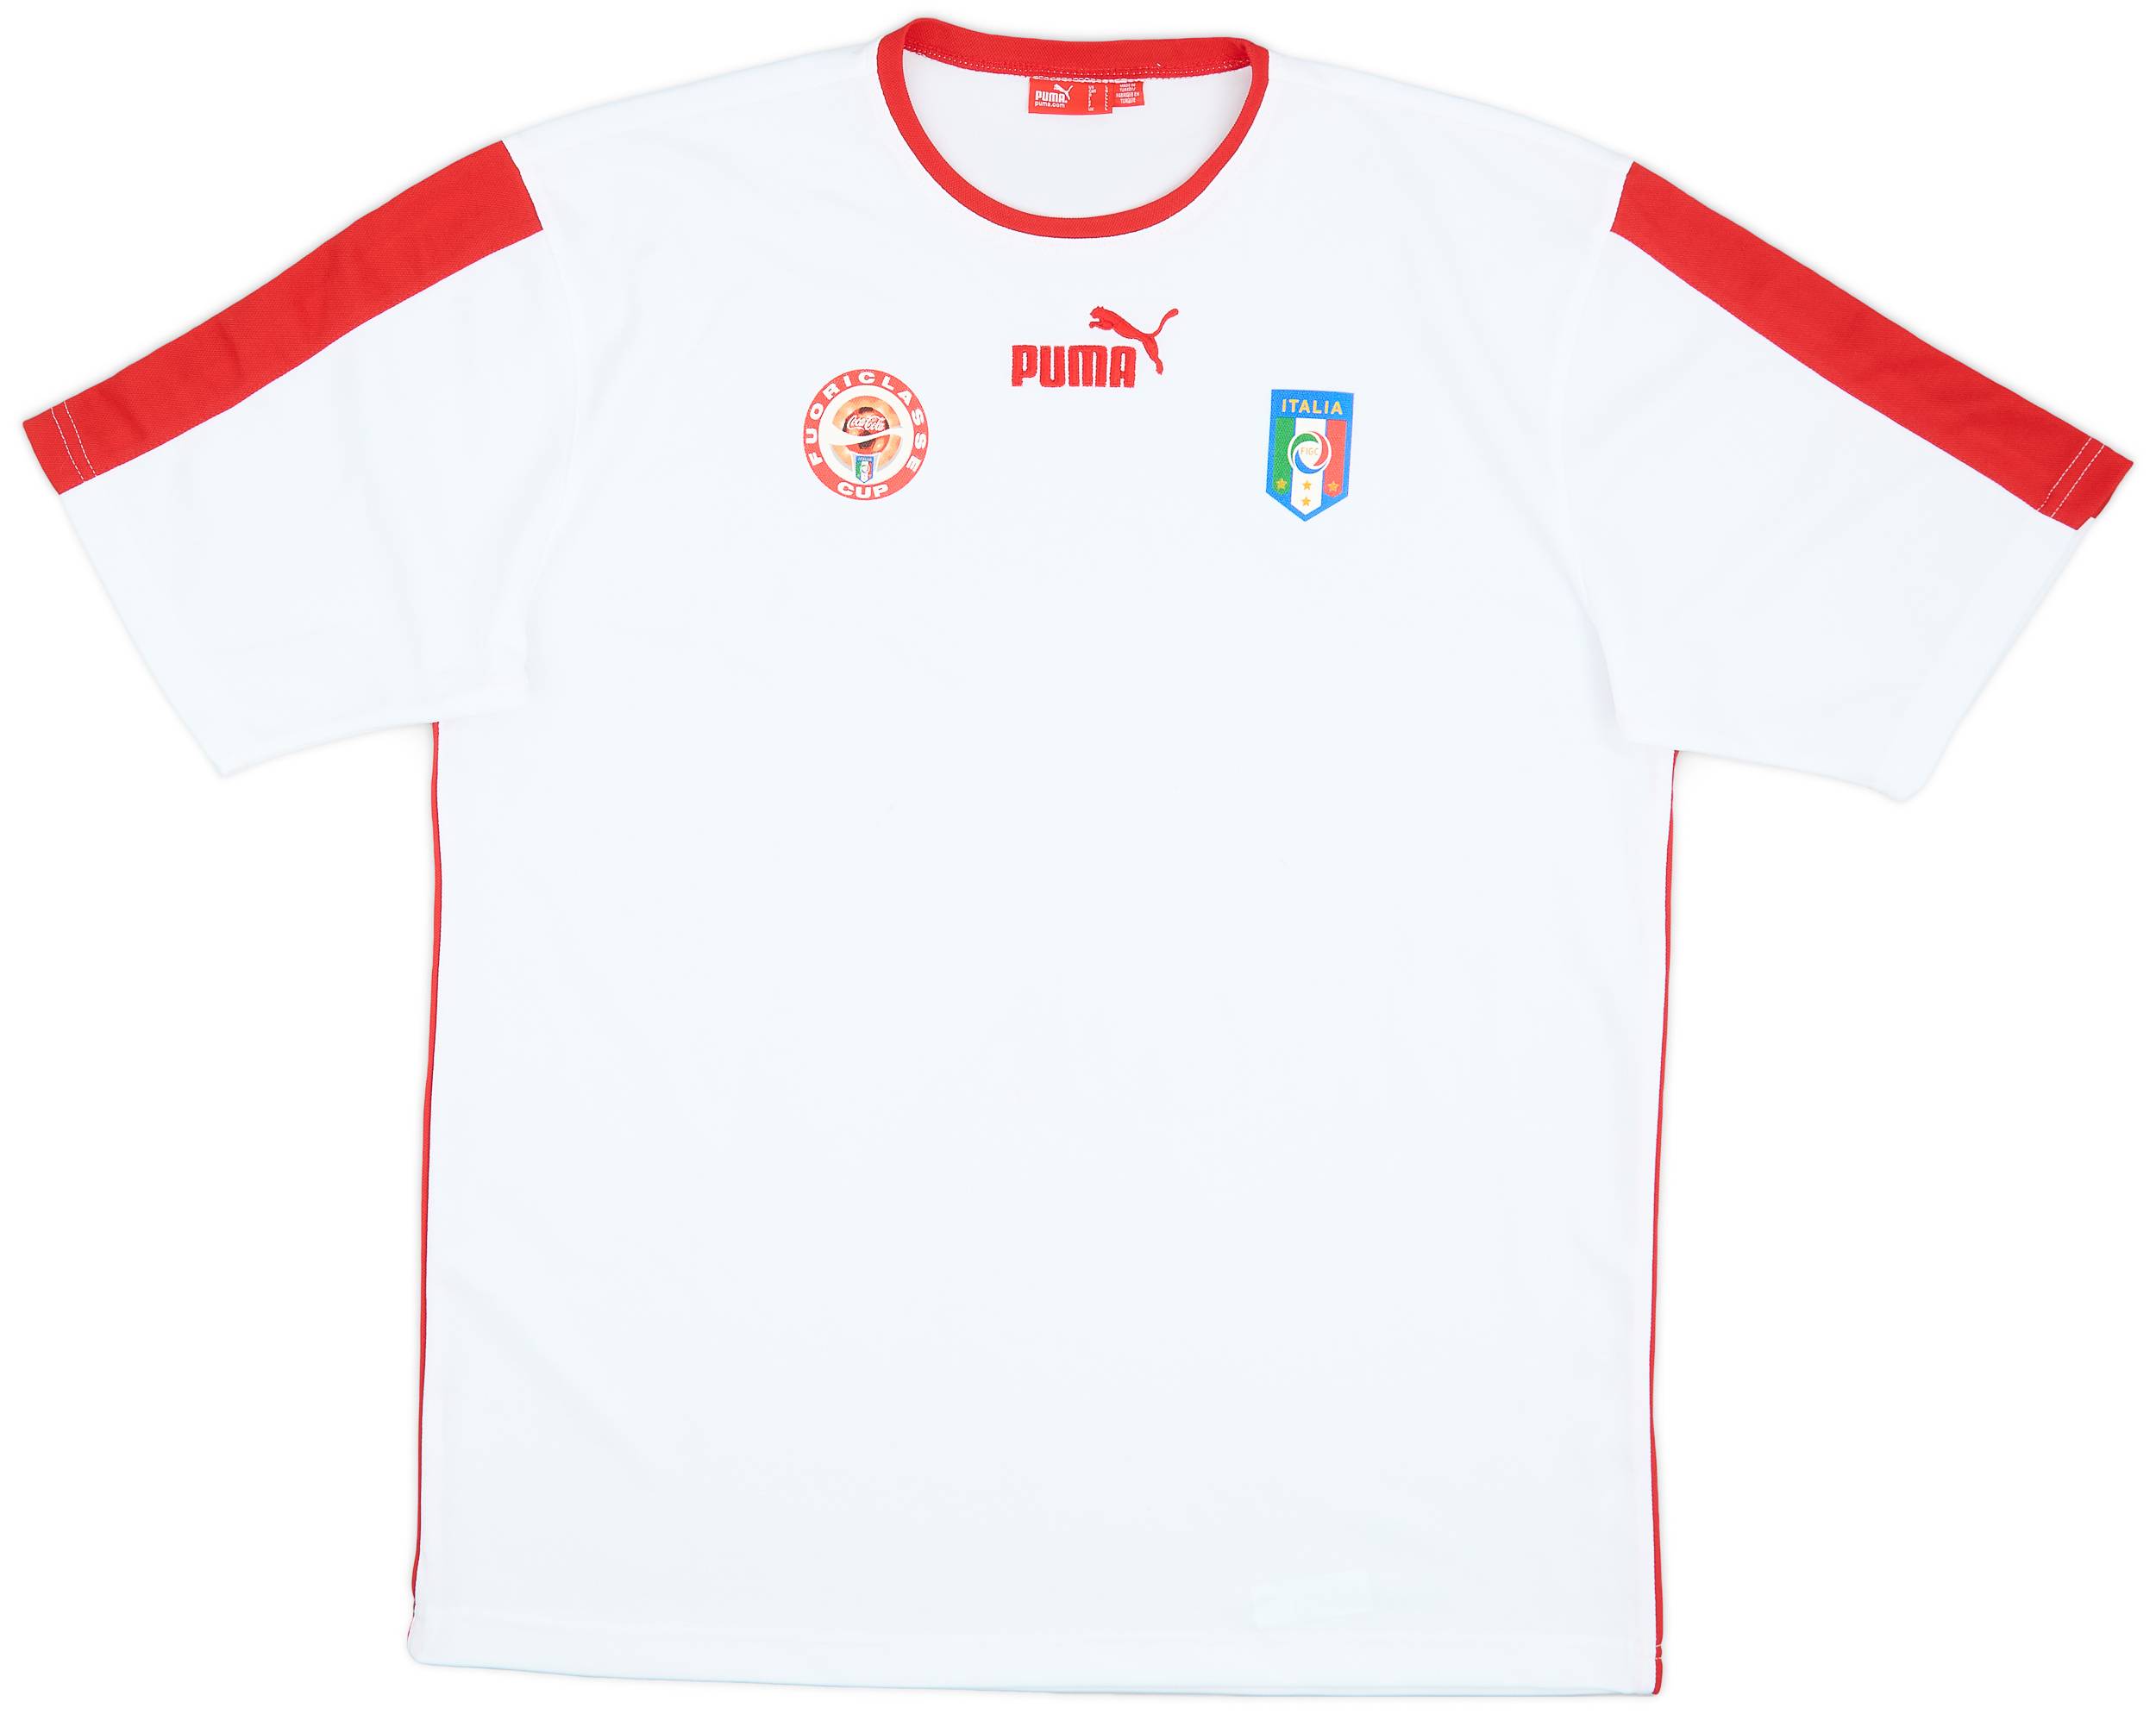 2010s Italy Puma Fuoriclasse Cup Shirt - 8/10 - (L)